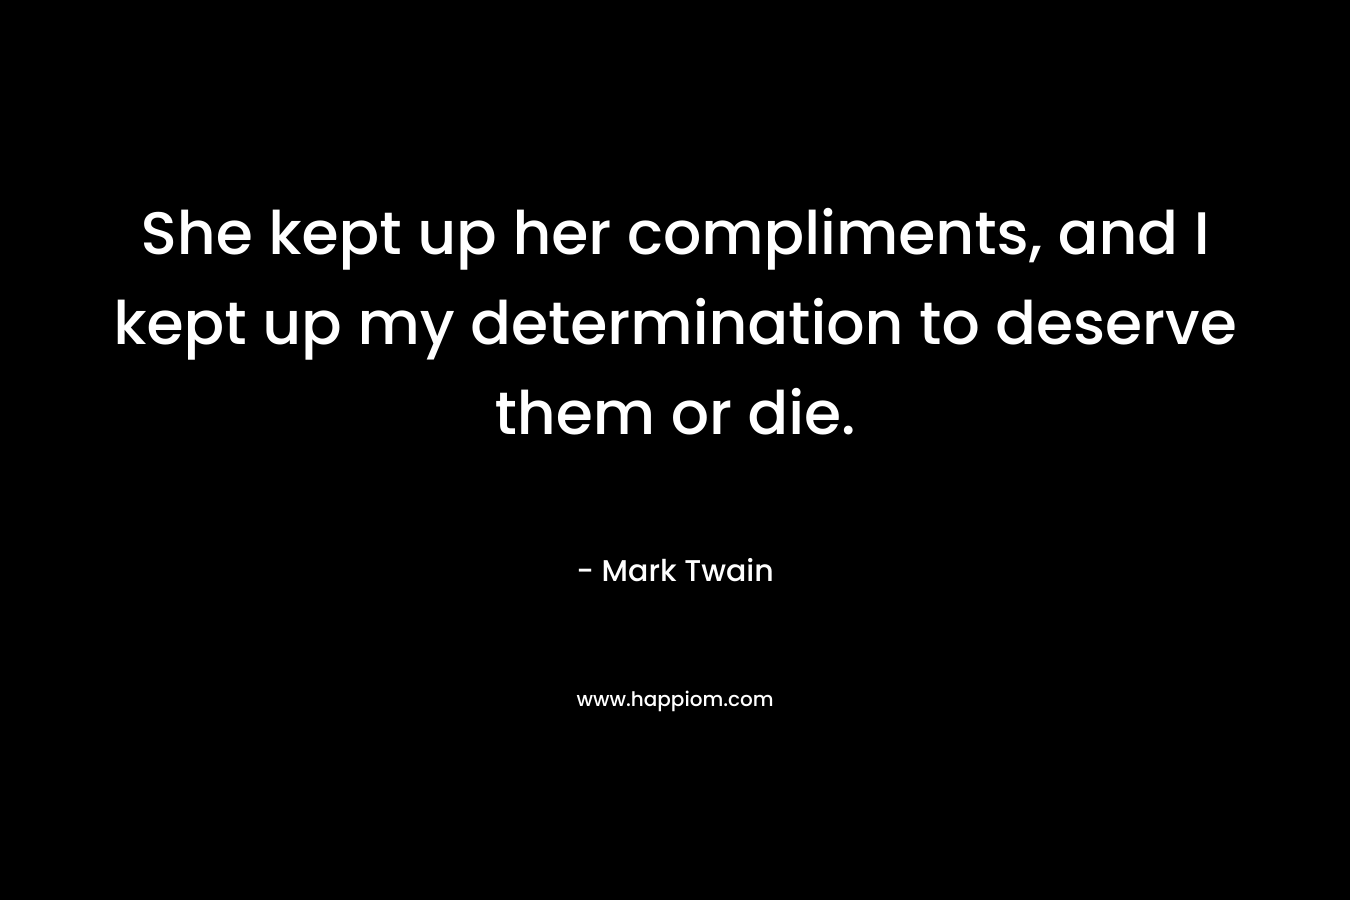 She kept up her compliments, and I kept up my determination to deserve them or die.